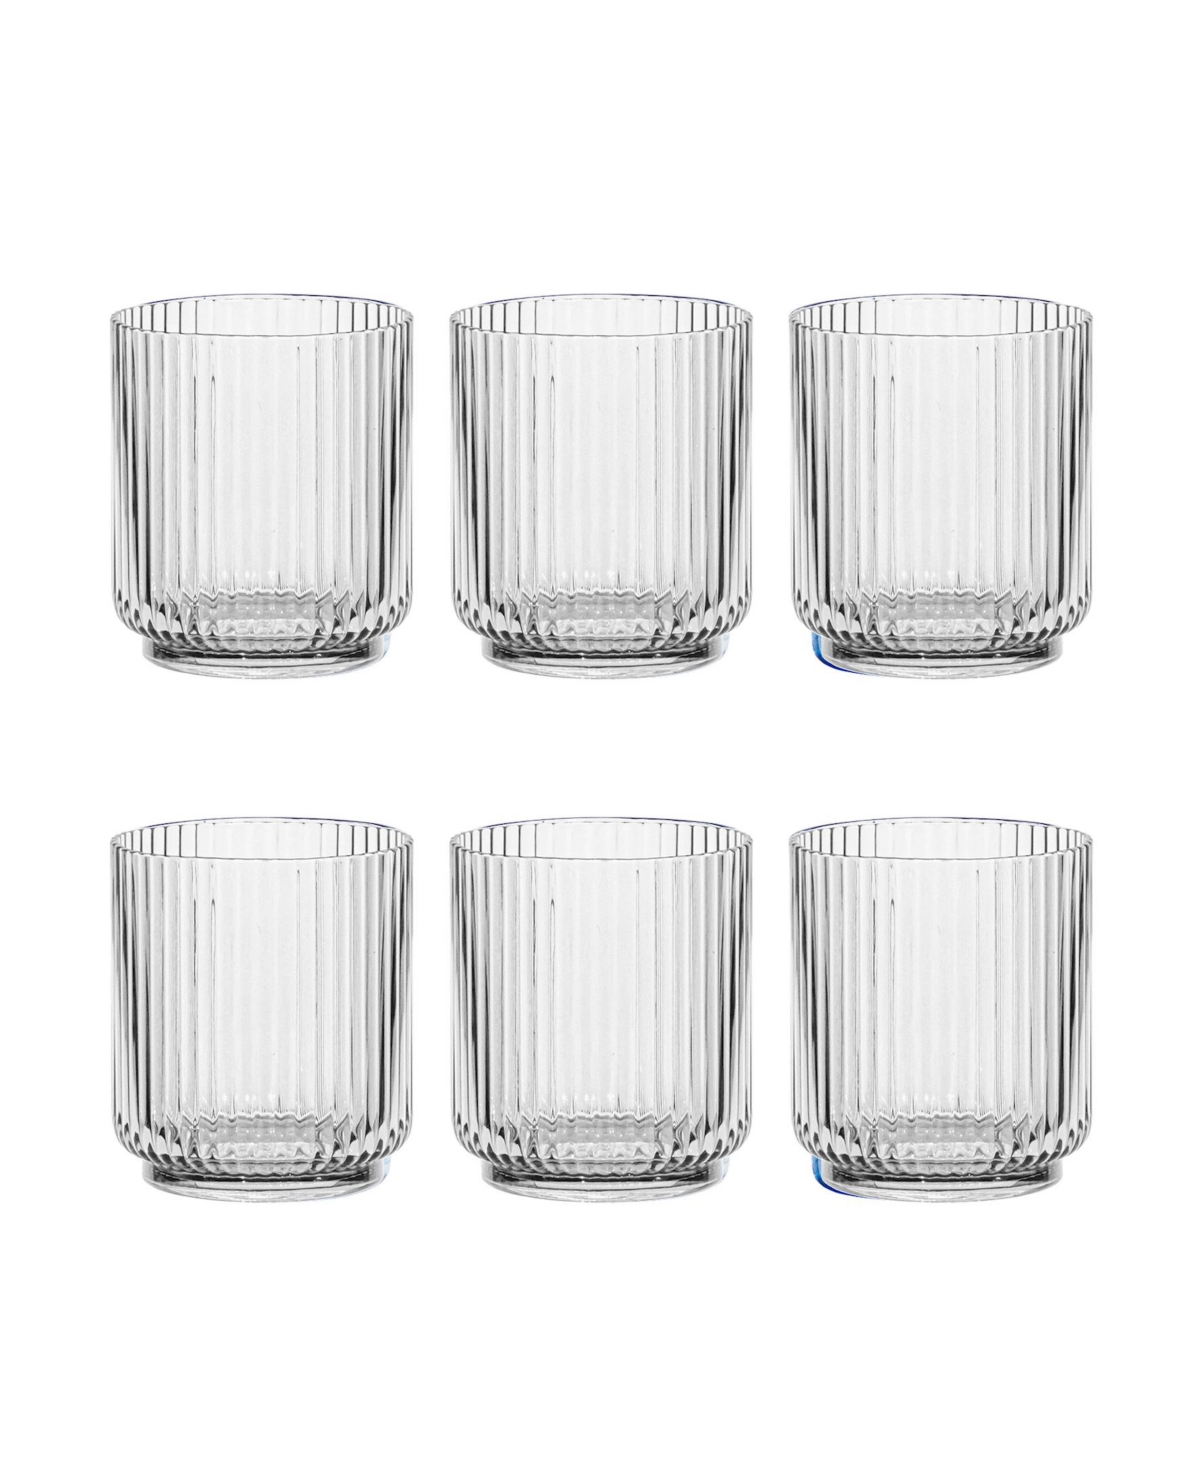 Tarhong Mesa Double Old Fashion 6-piece Premium Acrylic Glass Set, 15 oz In Clear